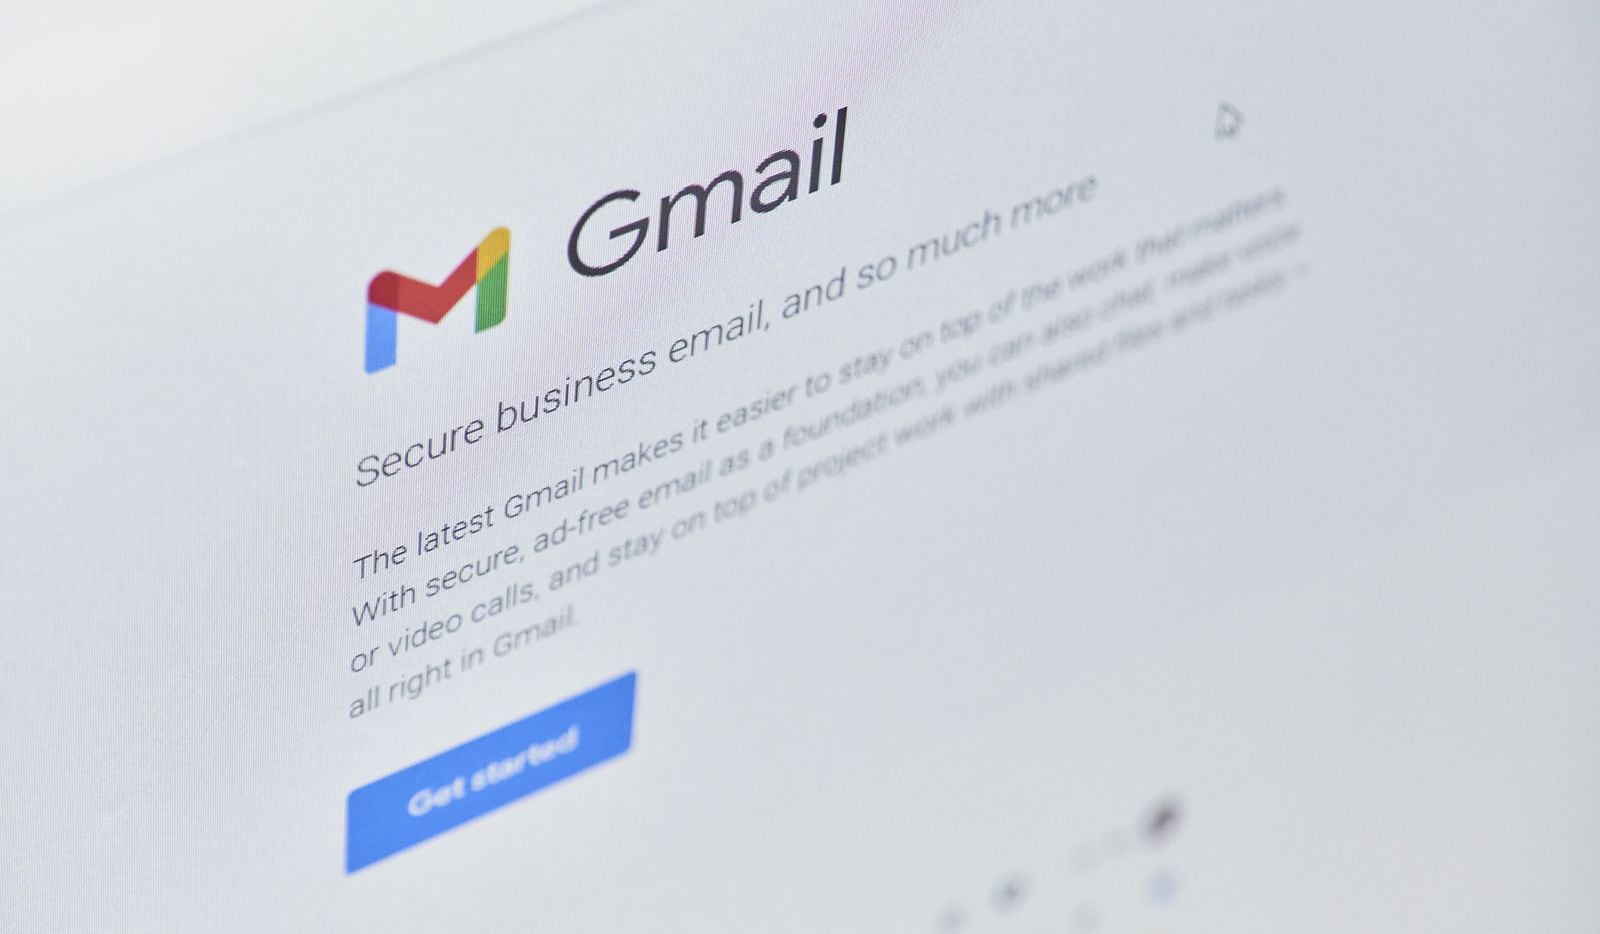 These instructions also apply if you are moving to any email service, not just Google.